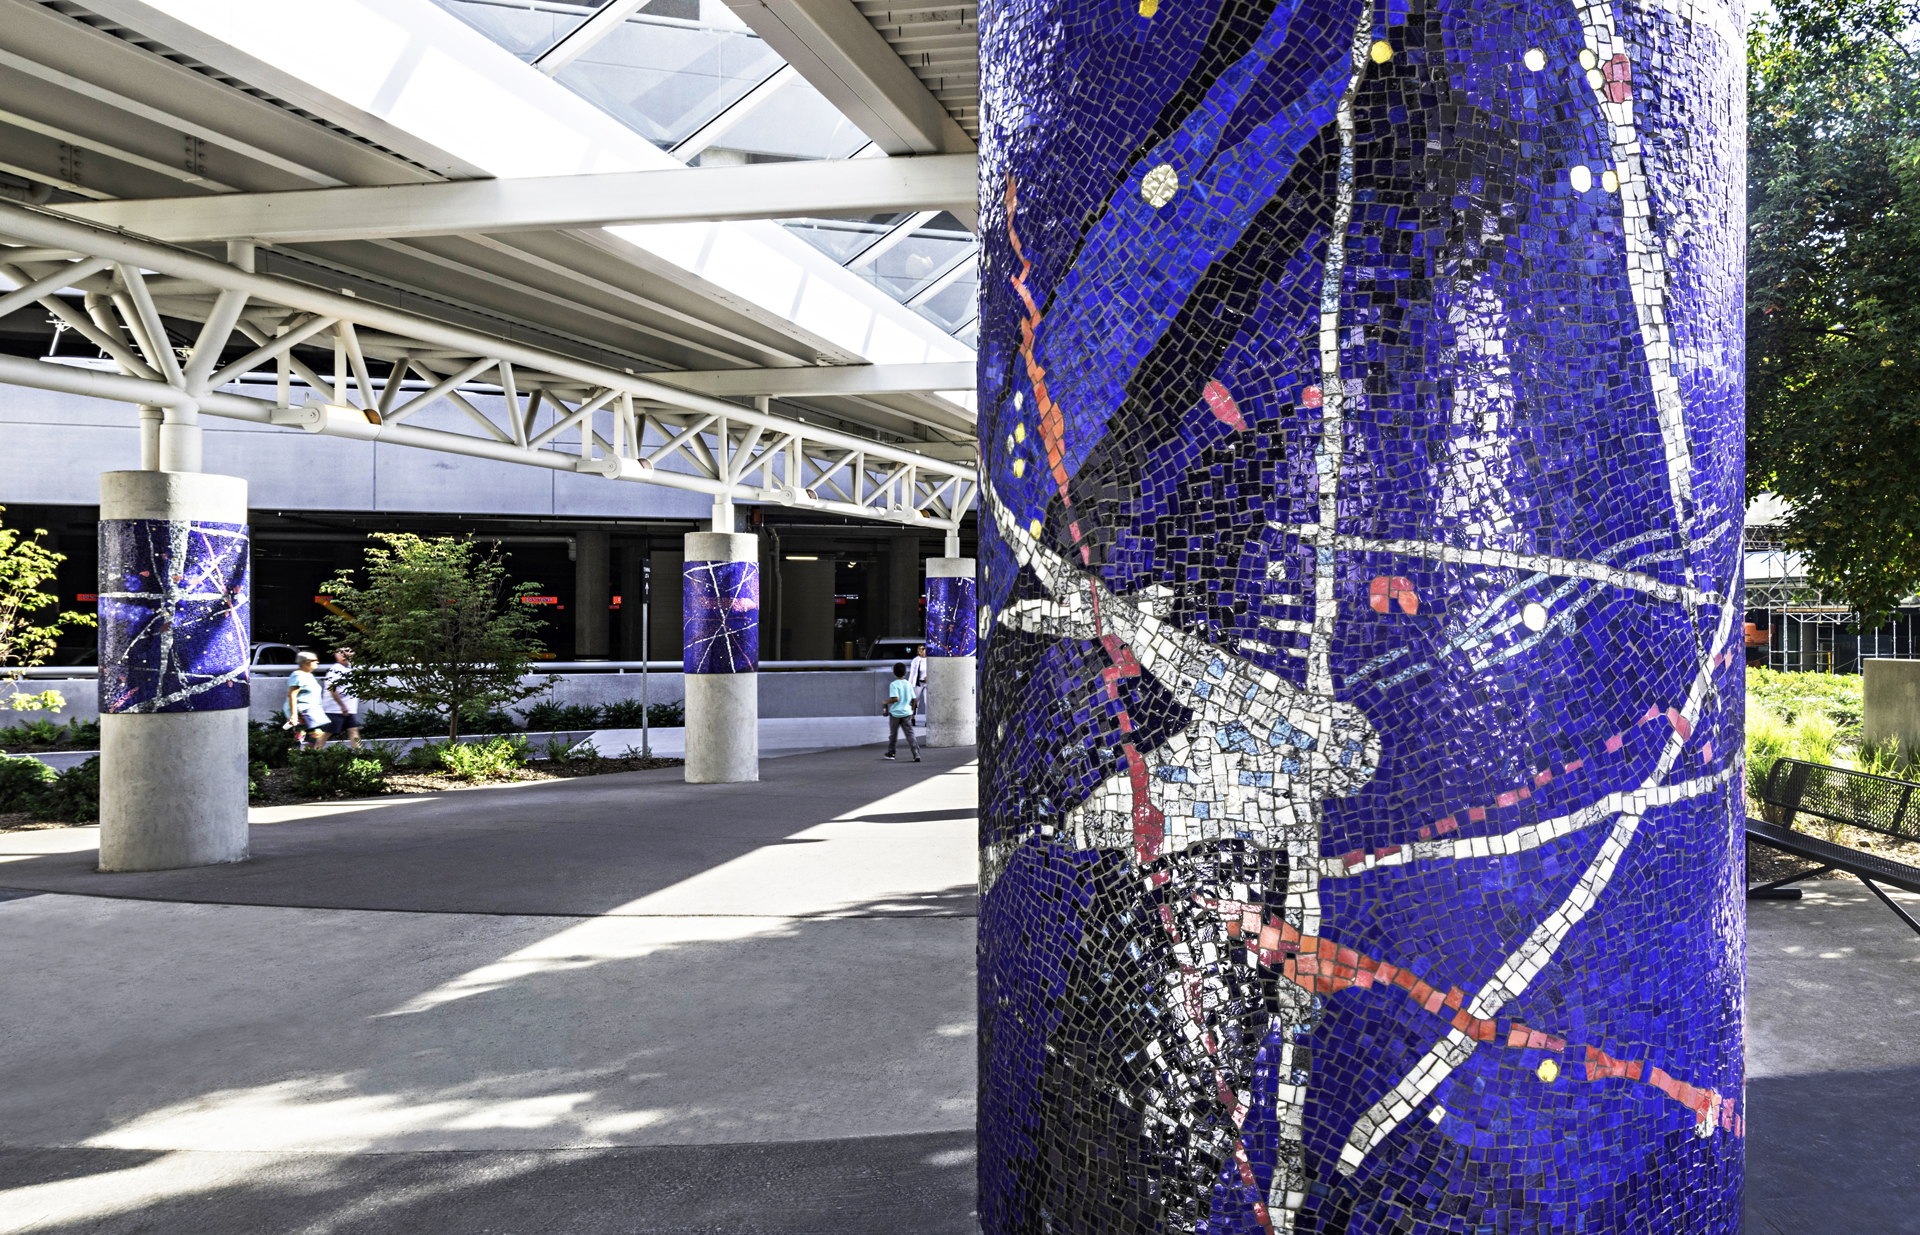 The Stars Come Out at Night- Nashville International Airport